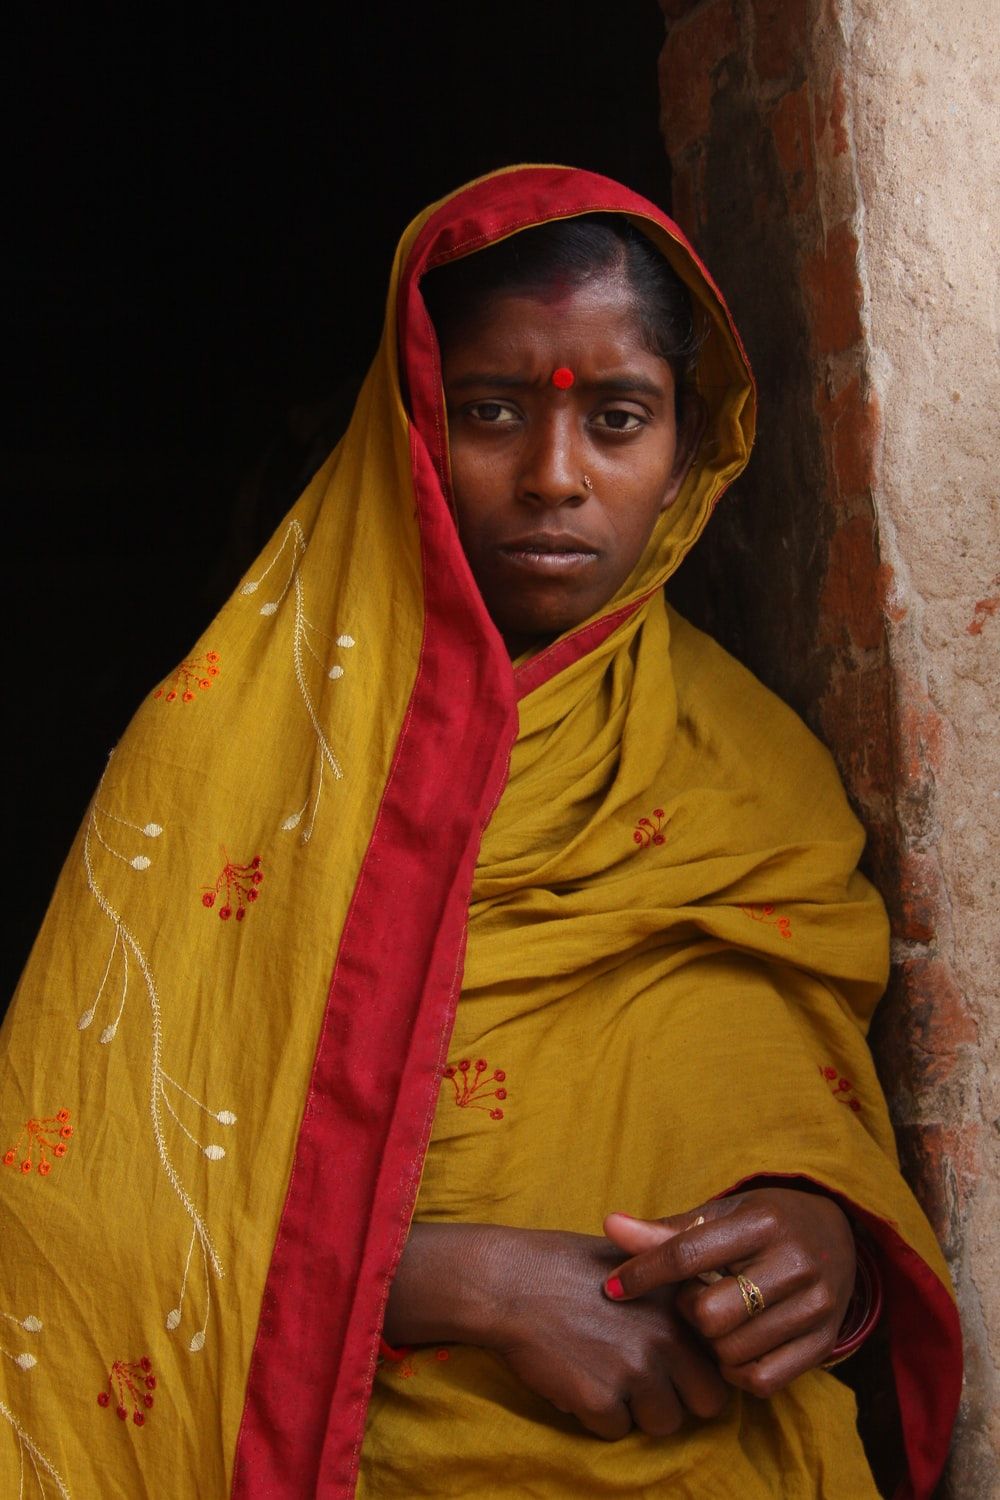 Village Lady Picture. Download Free Image